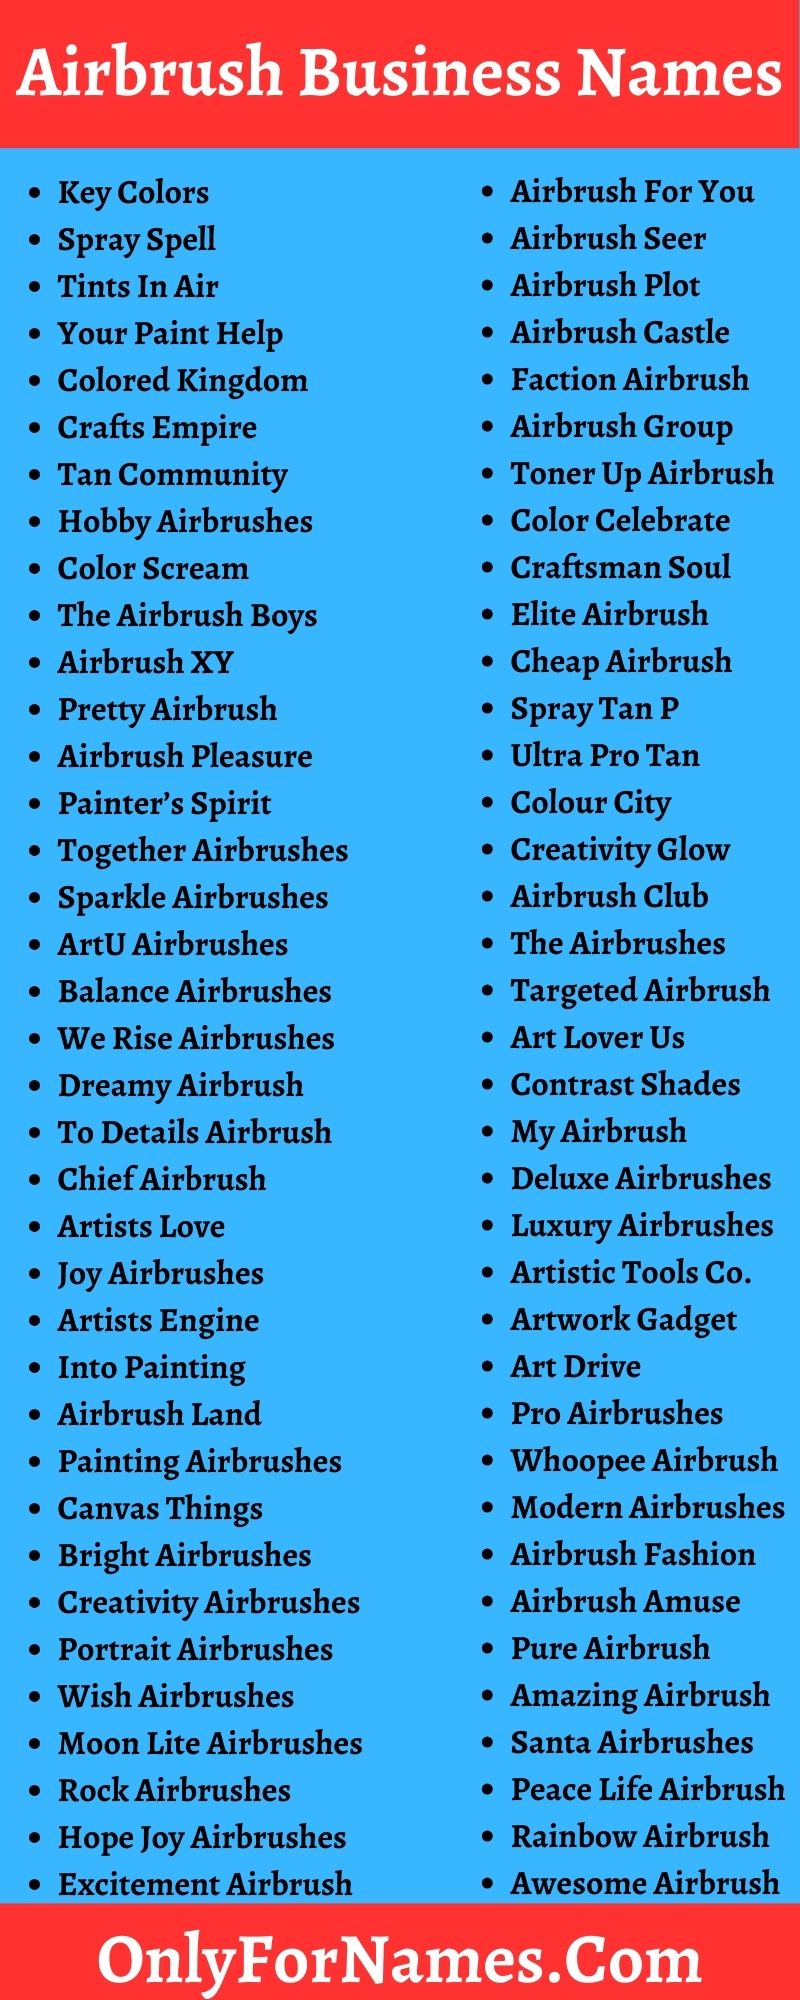 Airbrush Business Names